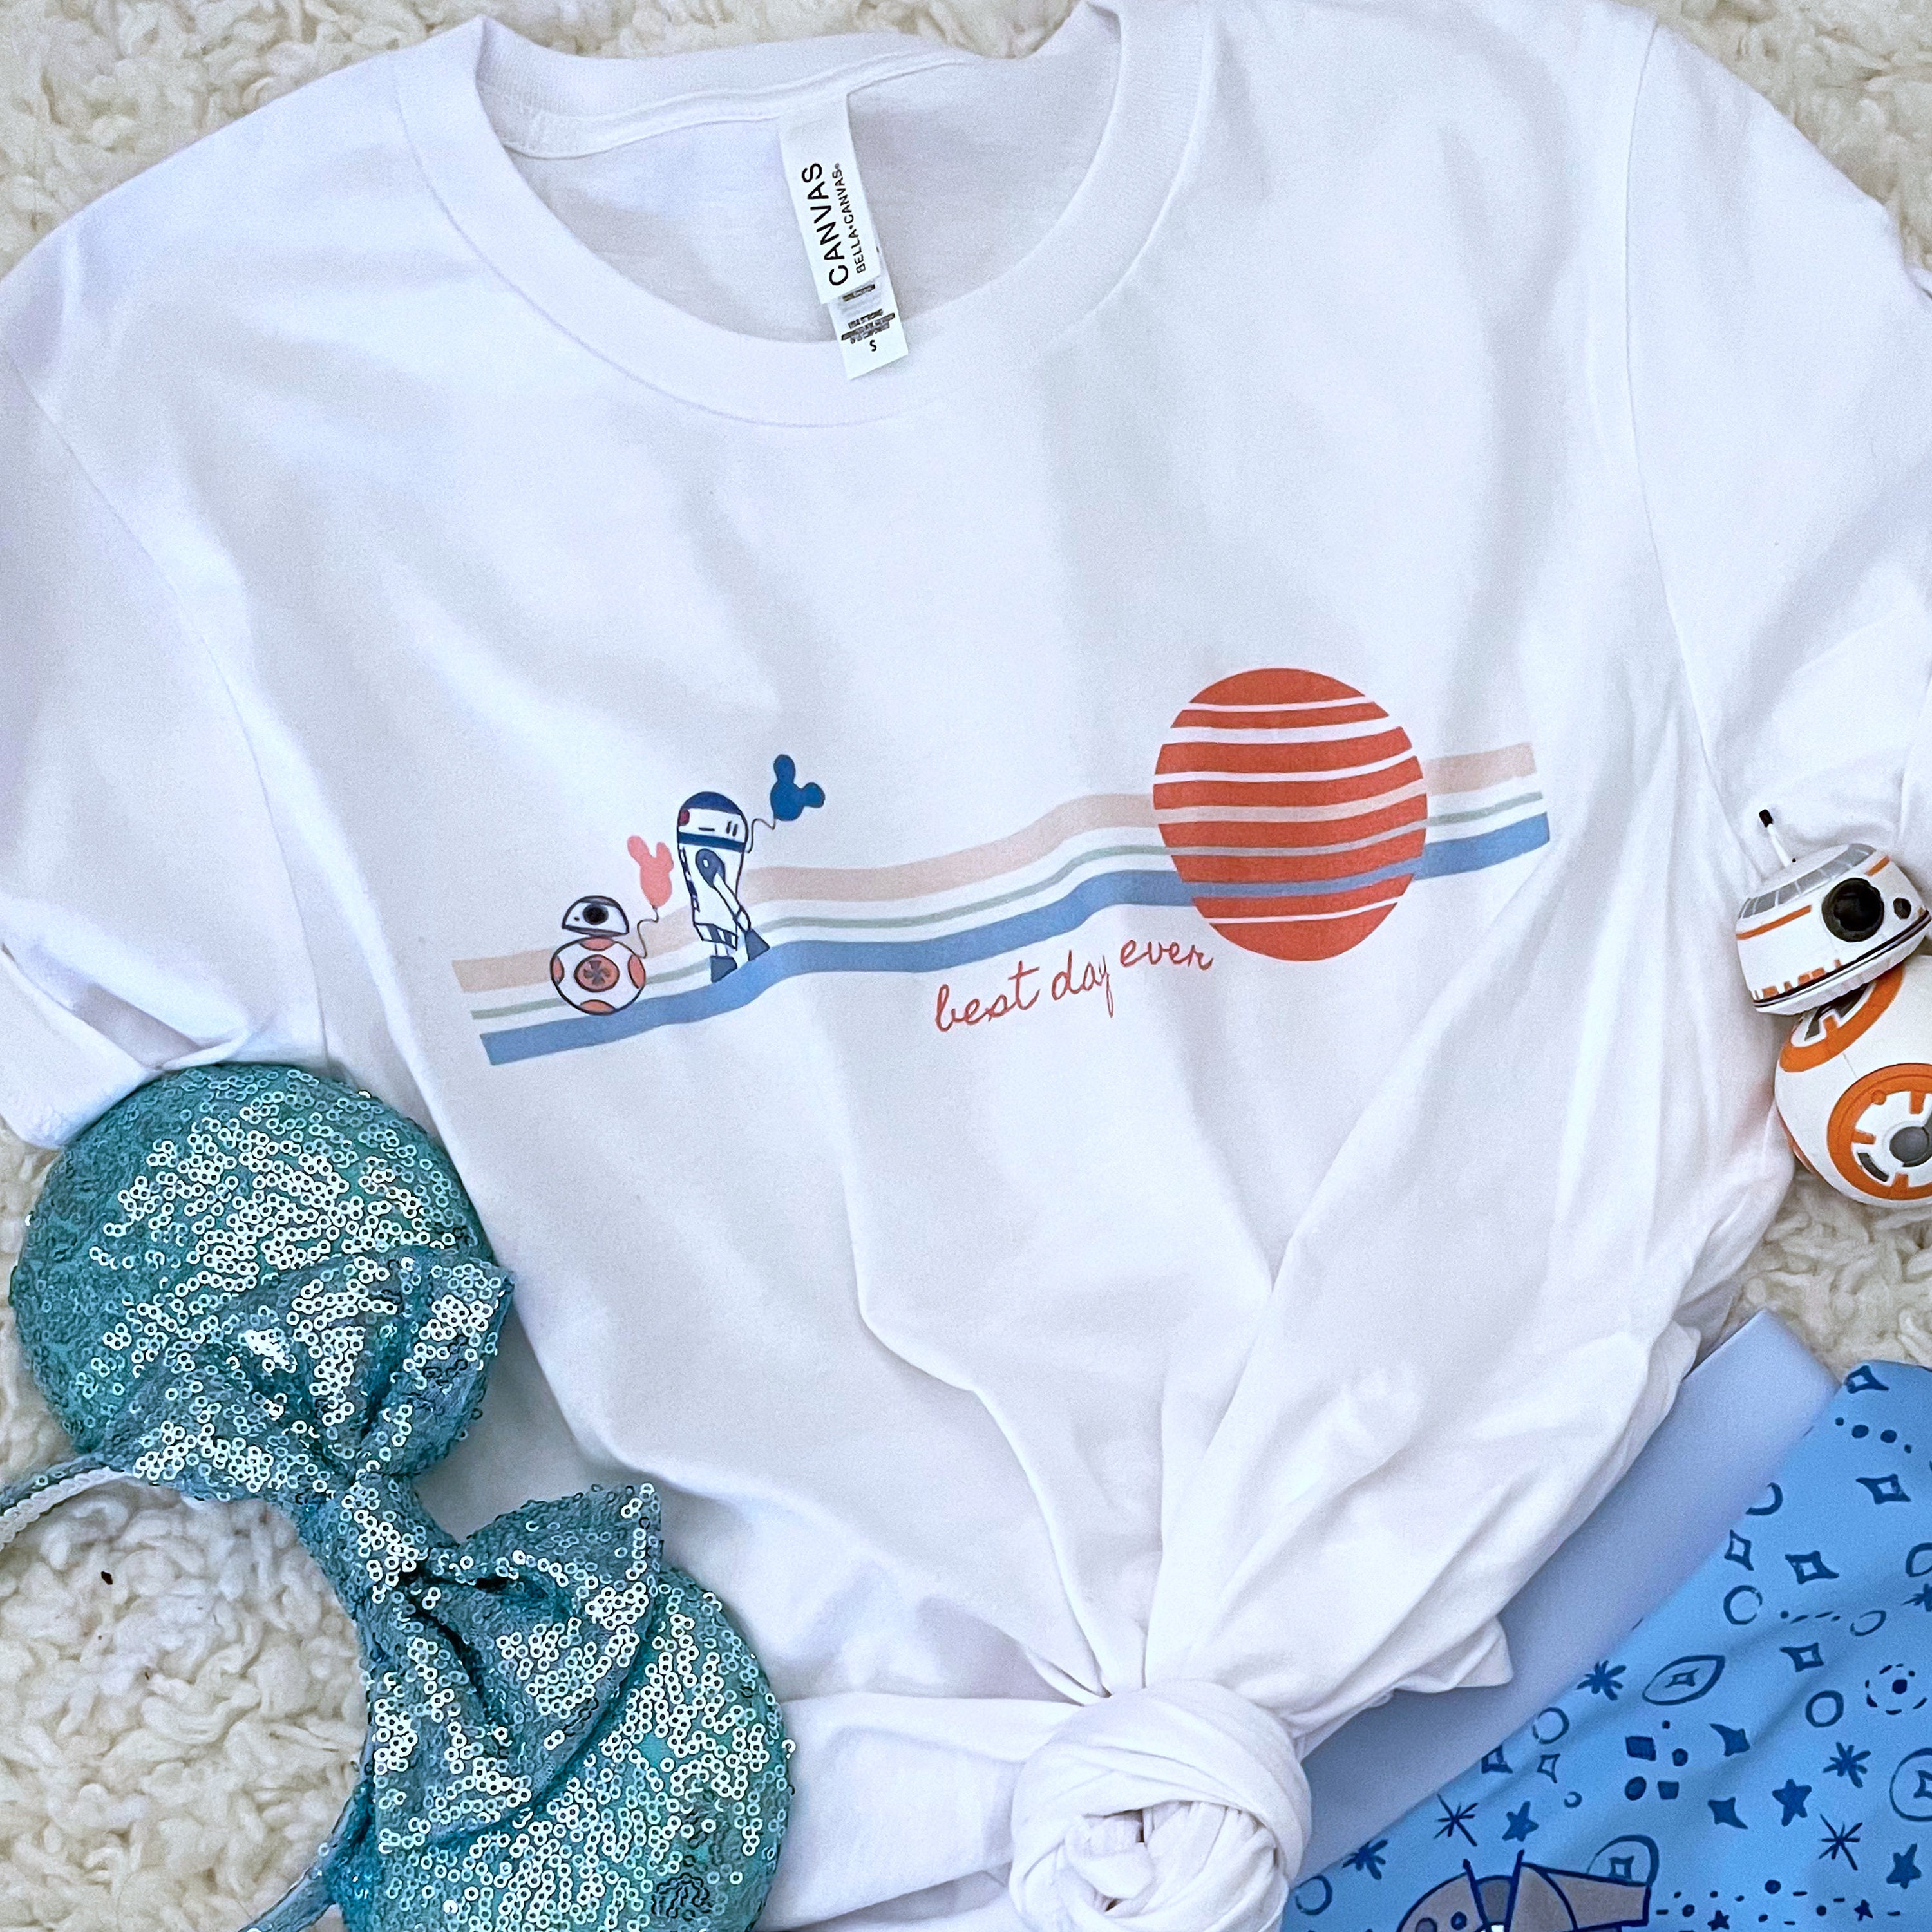 Custom Embroidered Star Wars BB8 Droid Shirt with Name All Star Wars characters available